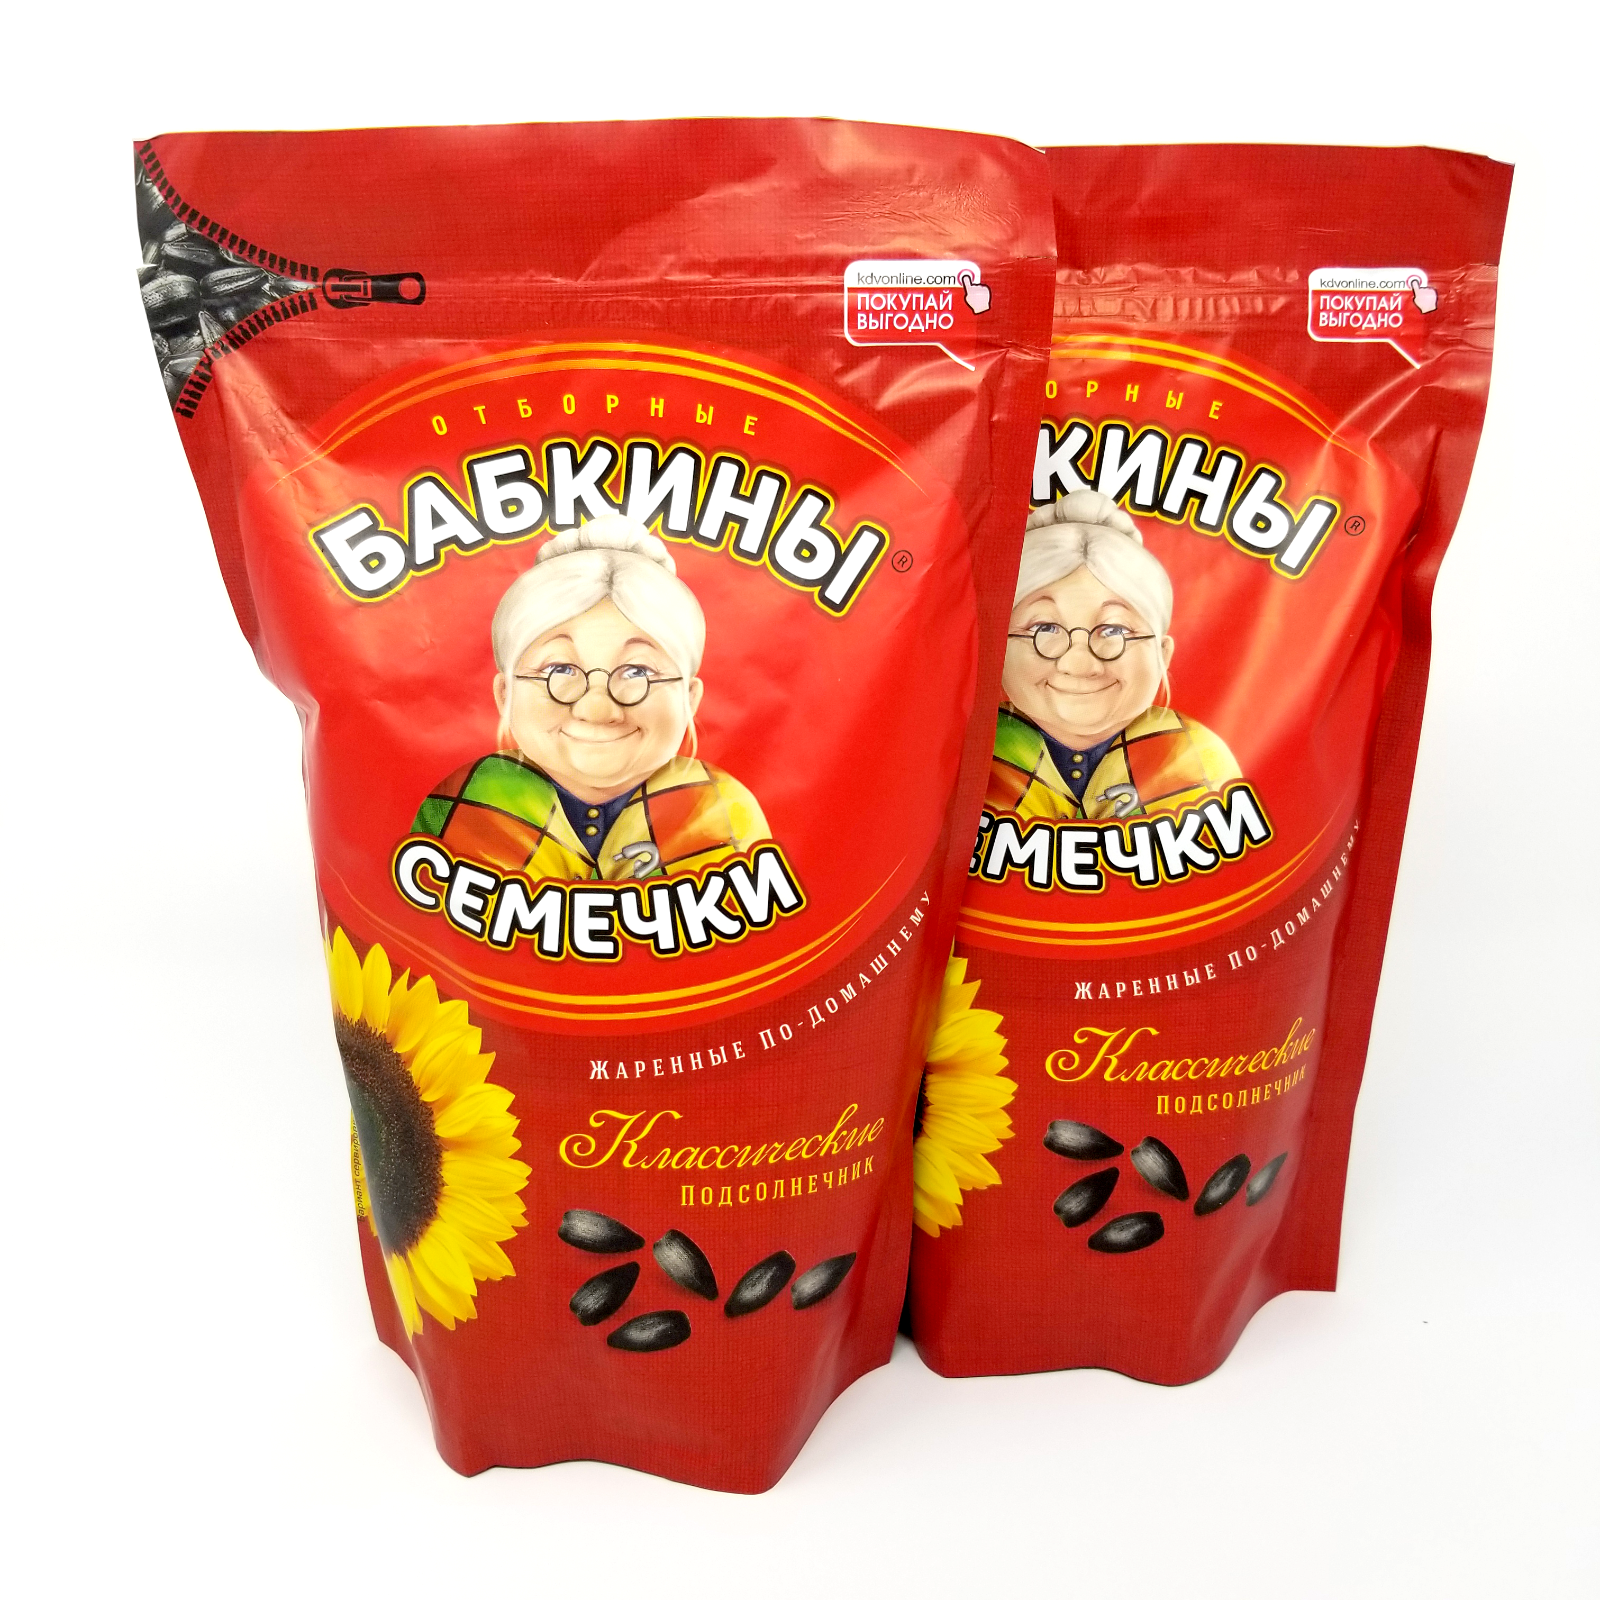 [PACK of 2] Russian BABKINI Roasted Sunflower Seeds Unsalted 500 gr